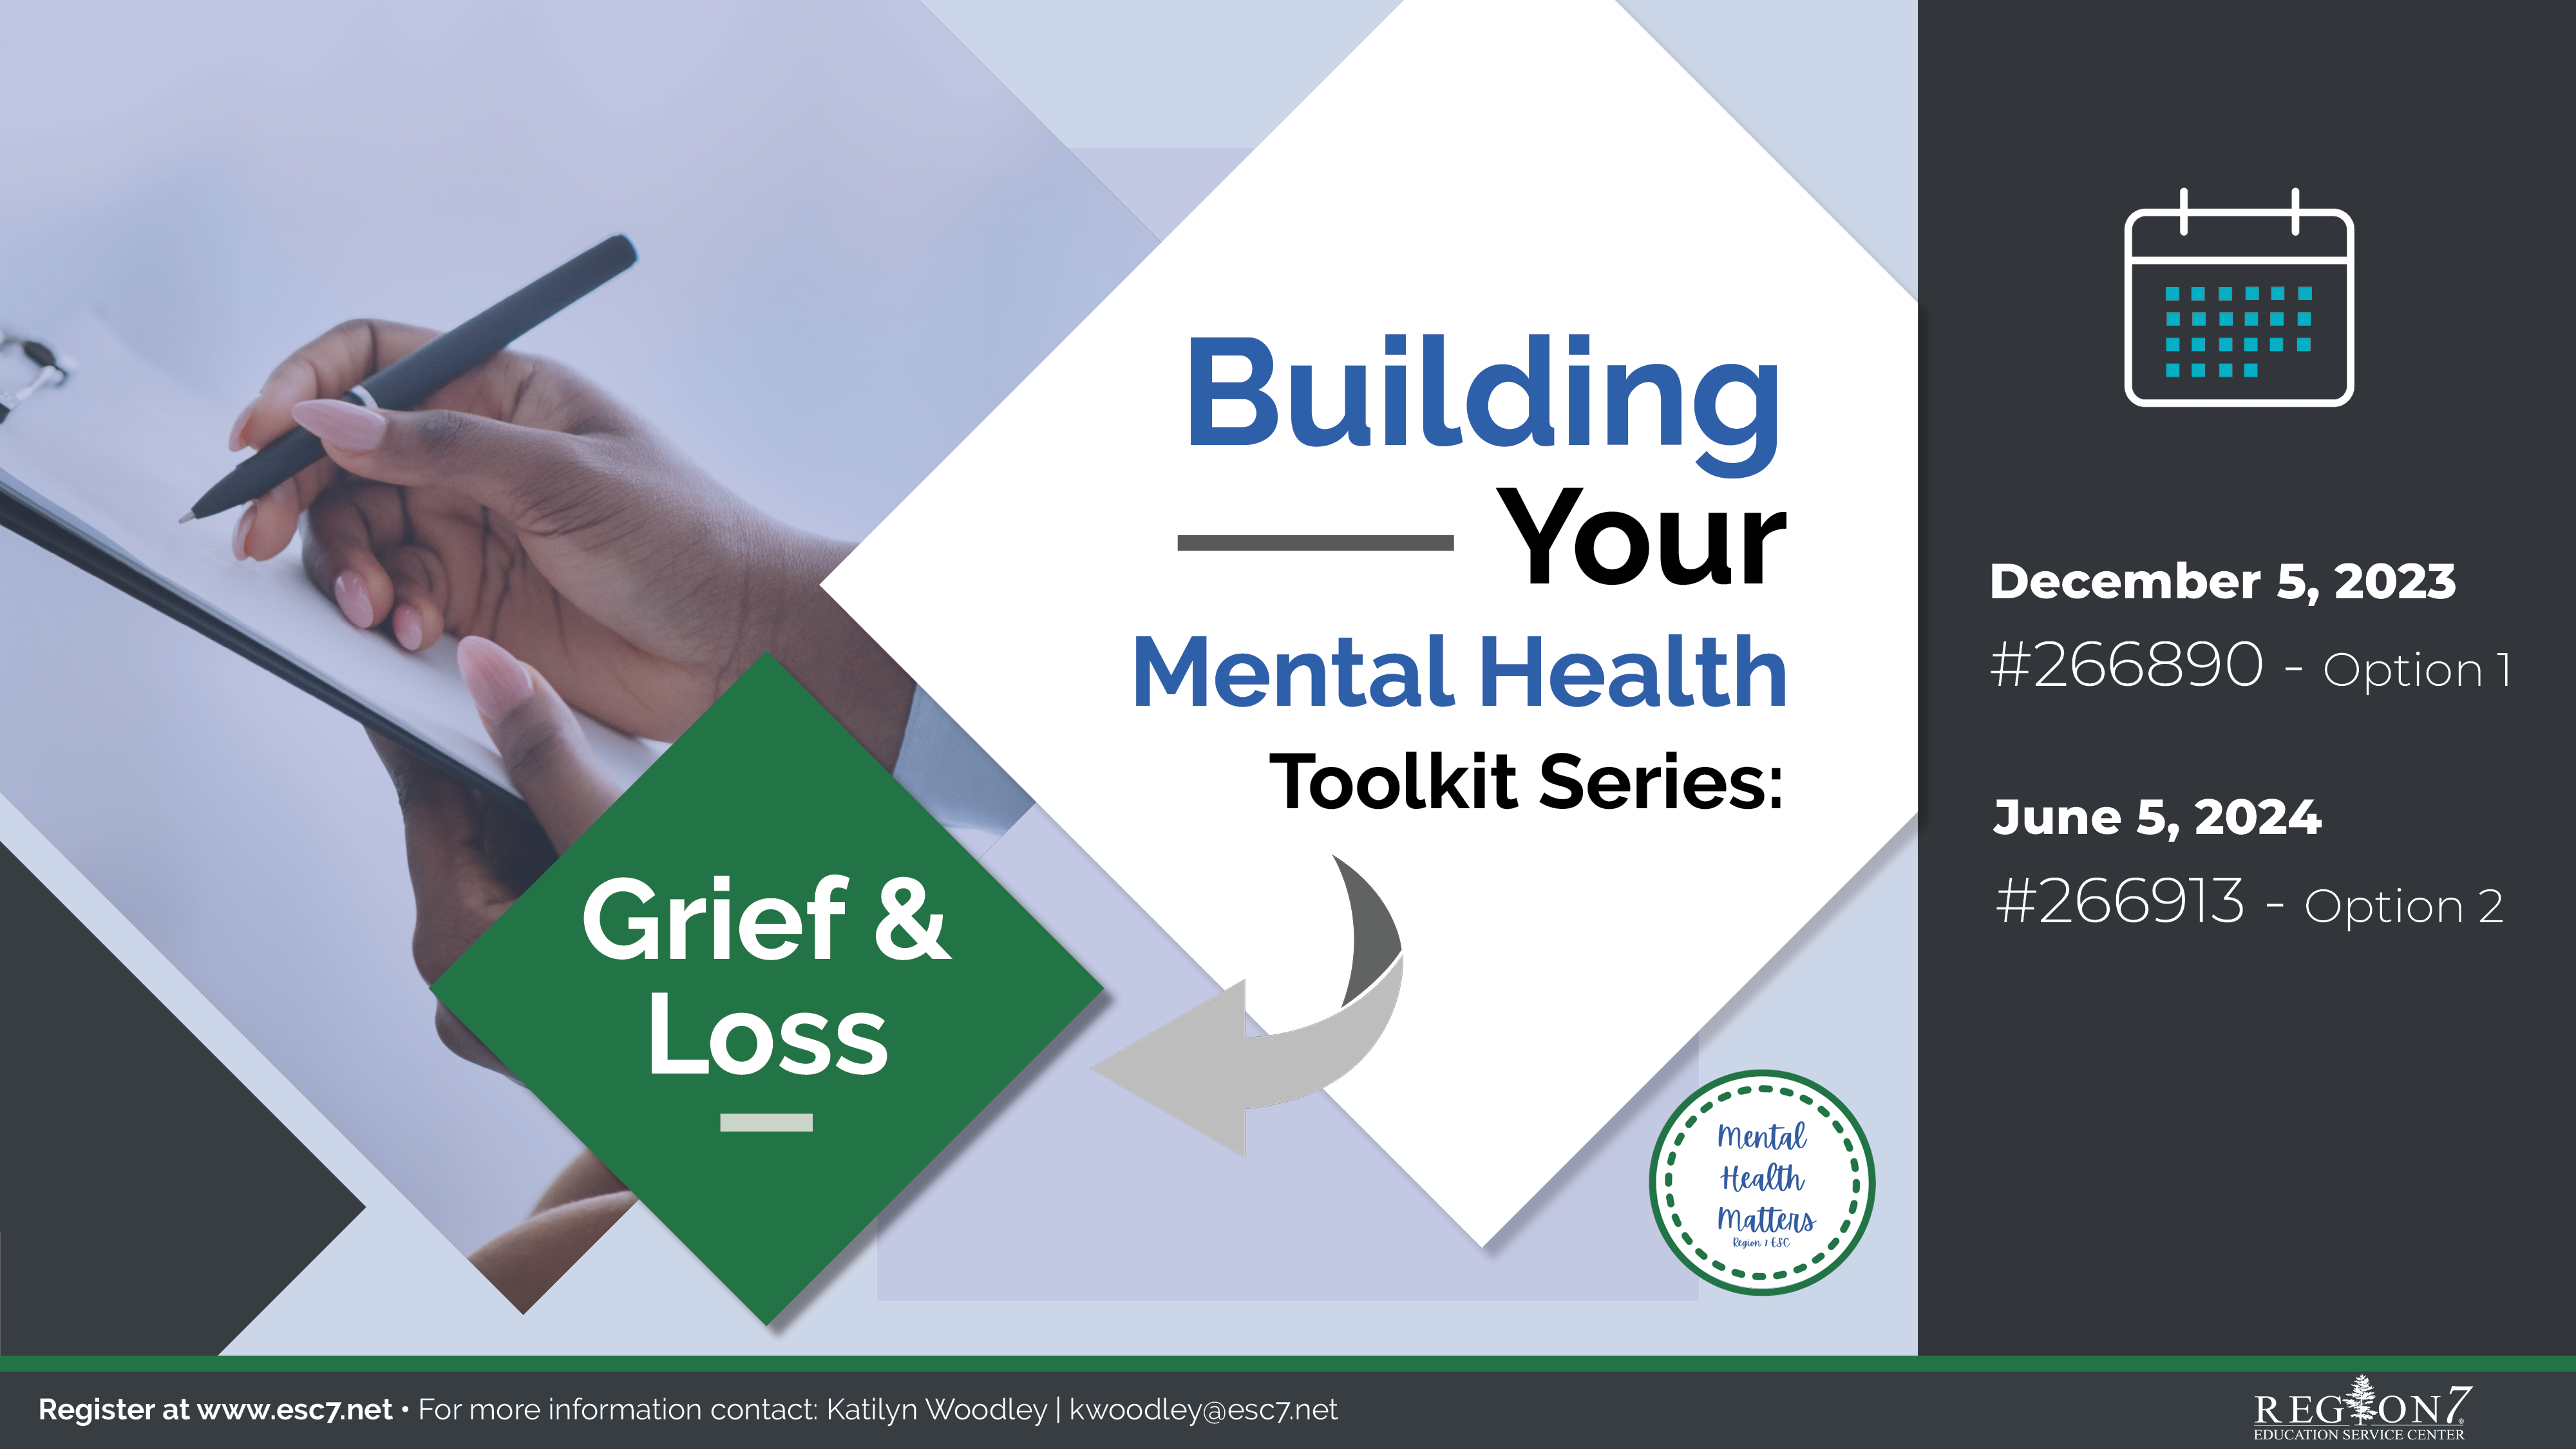 Building Your Mental Health Toolkit